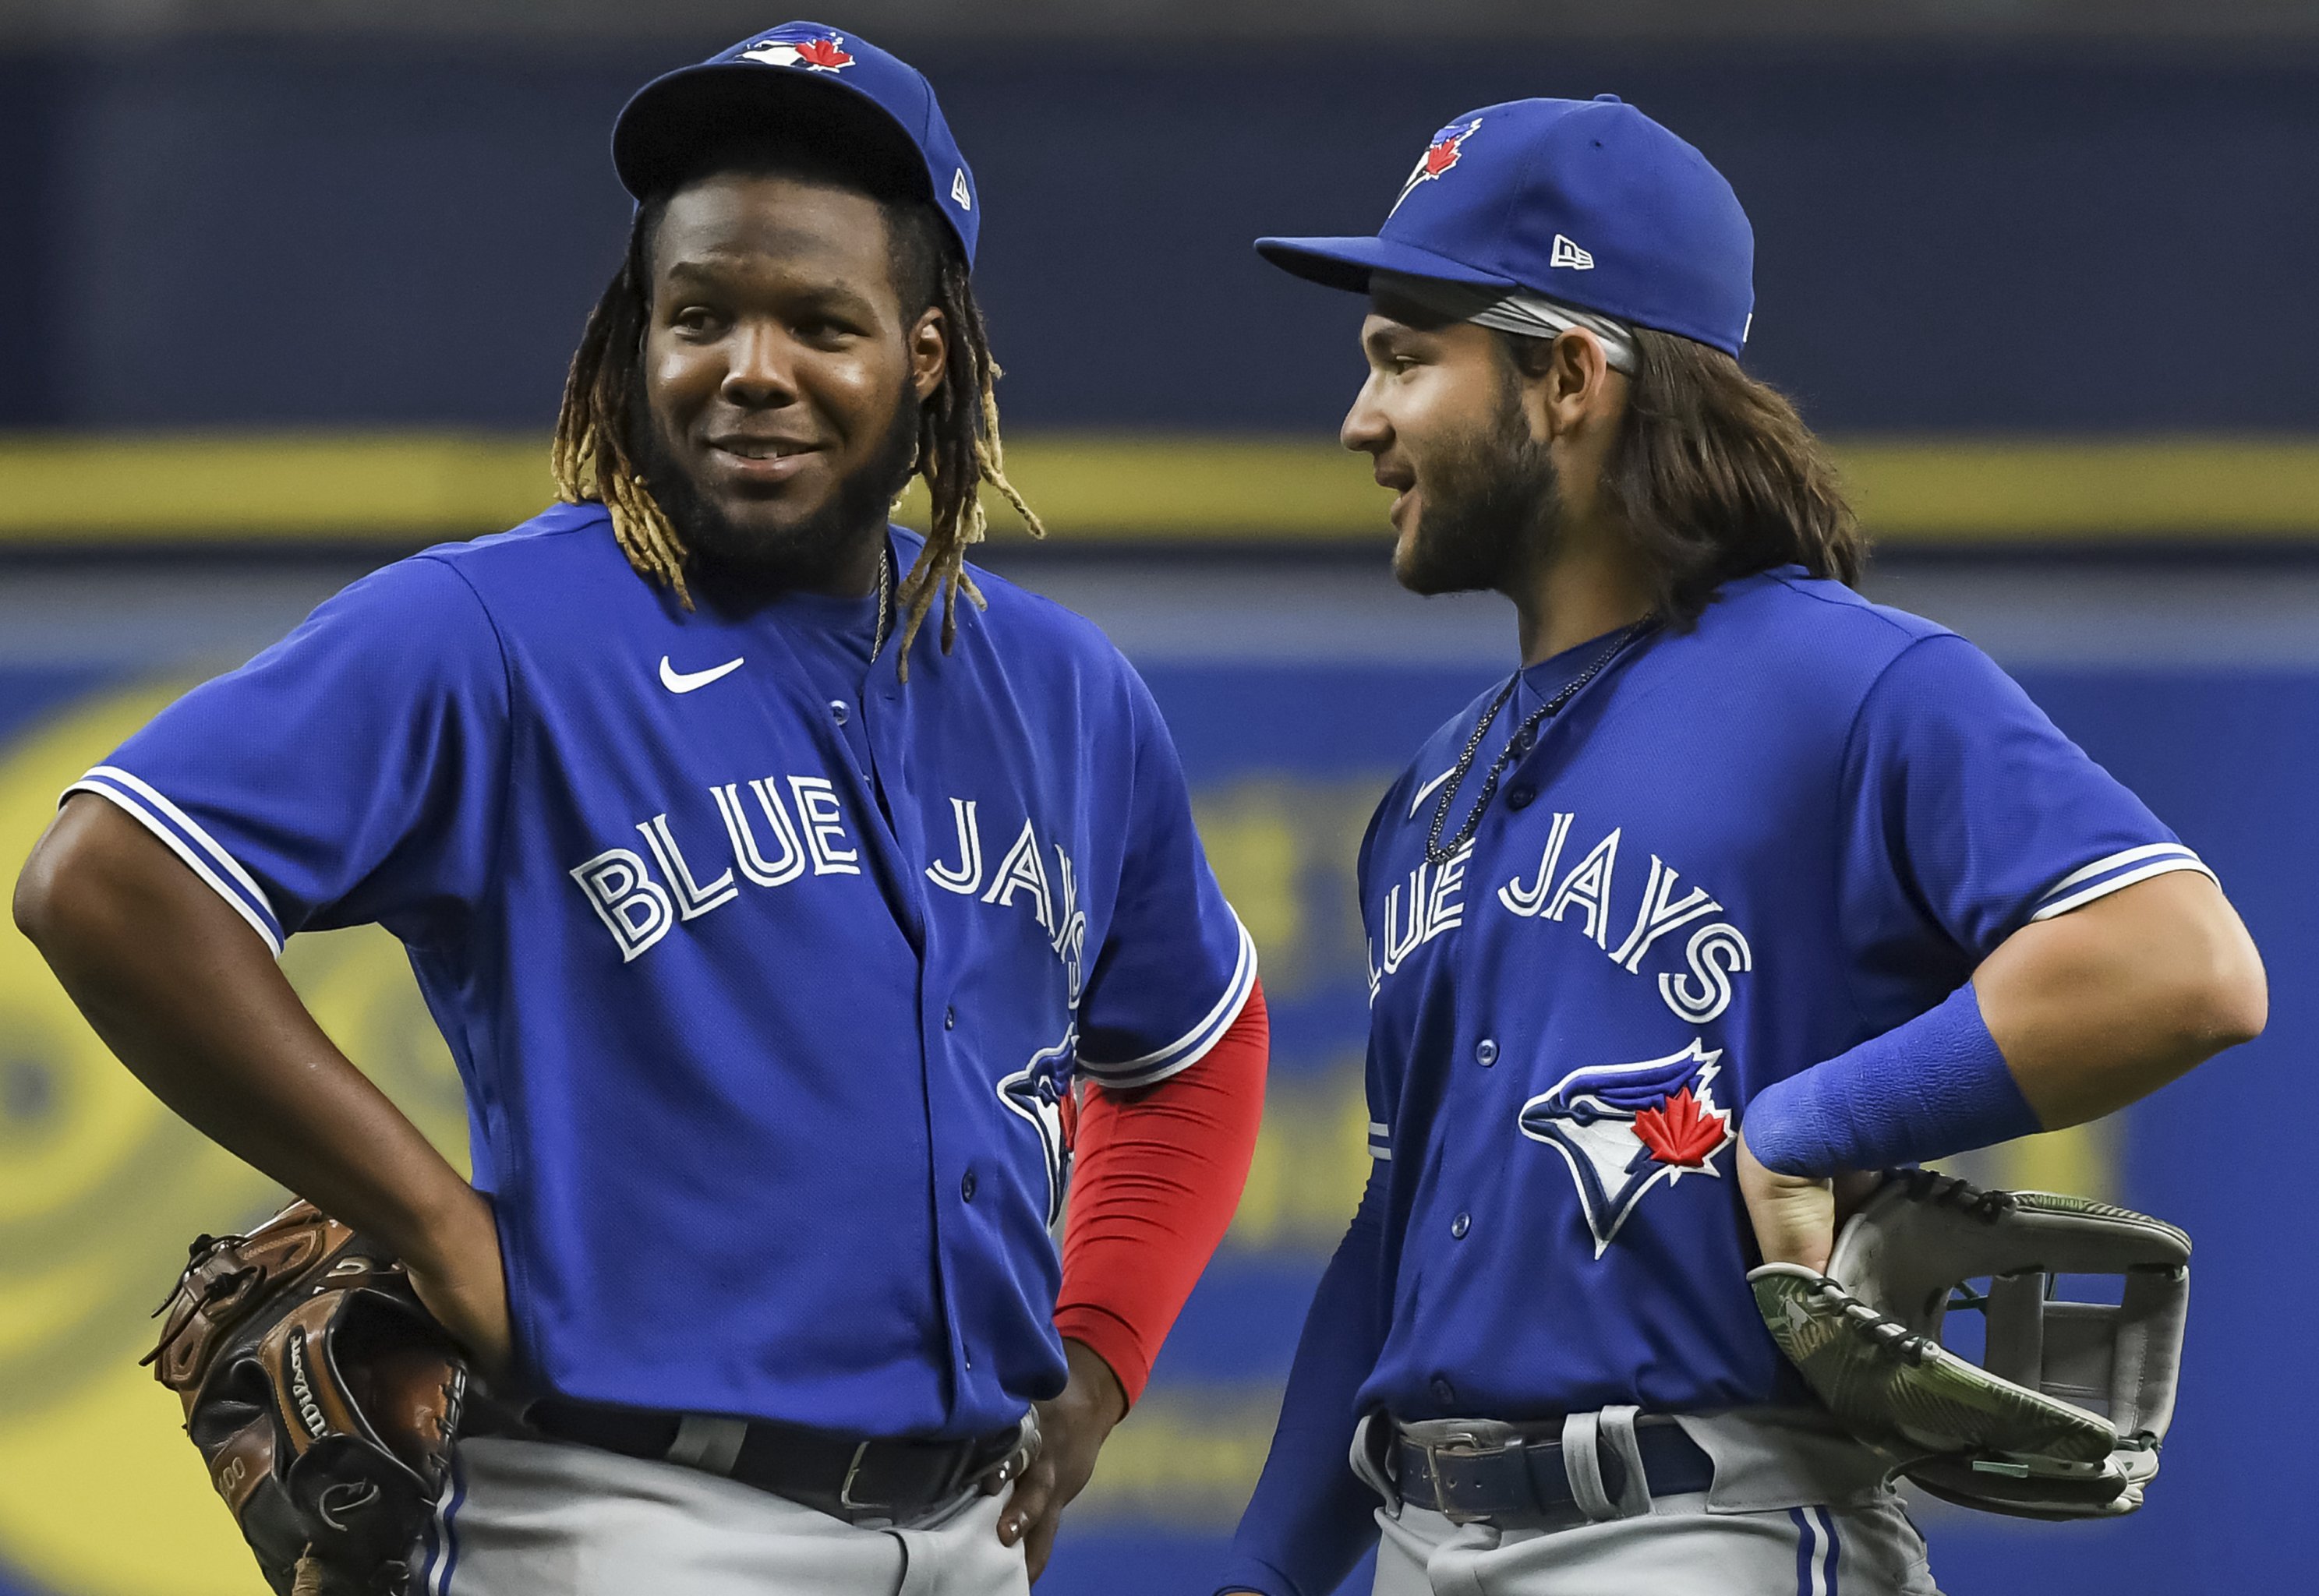 Jays prospect Bichette driven to be all-star material